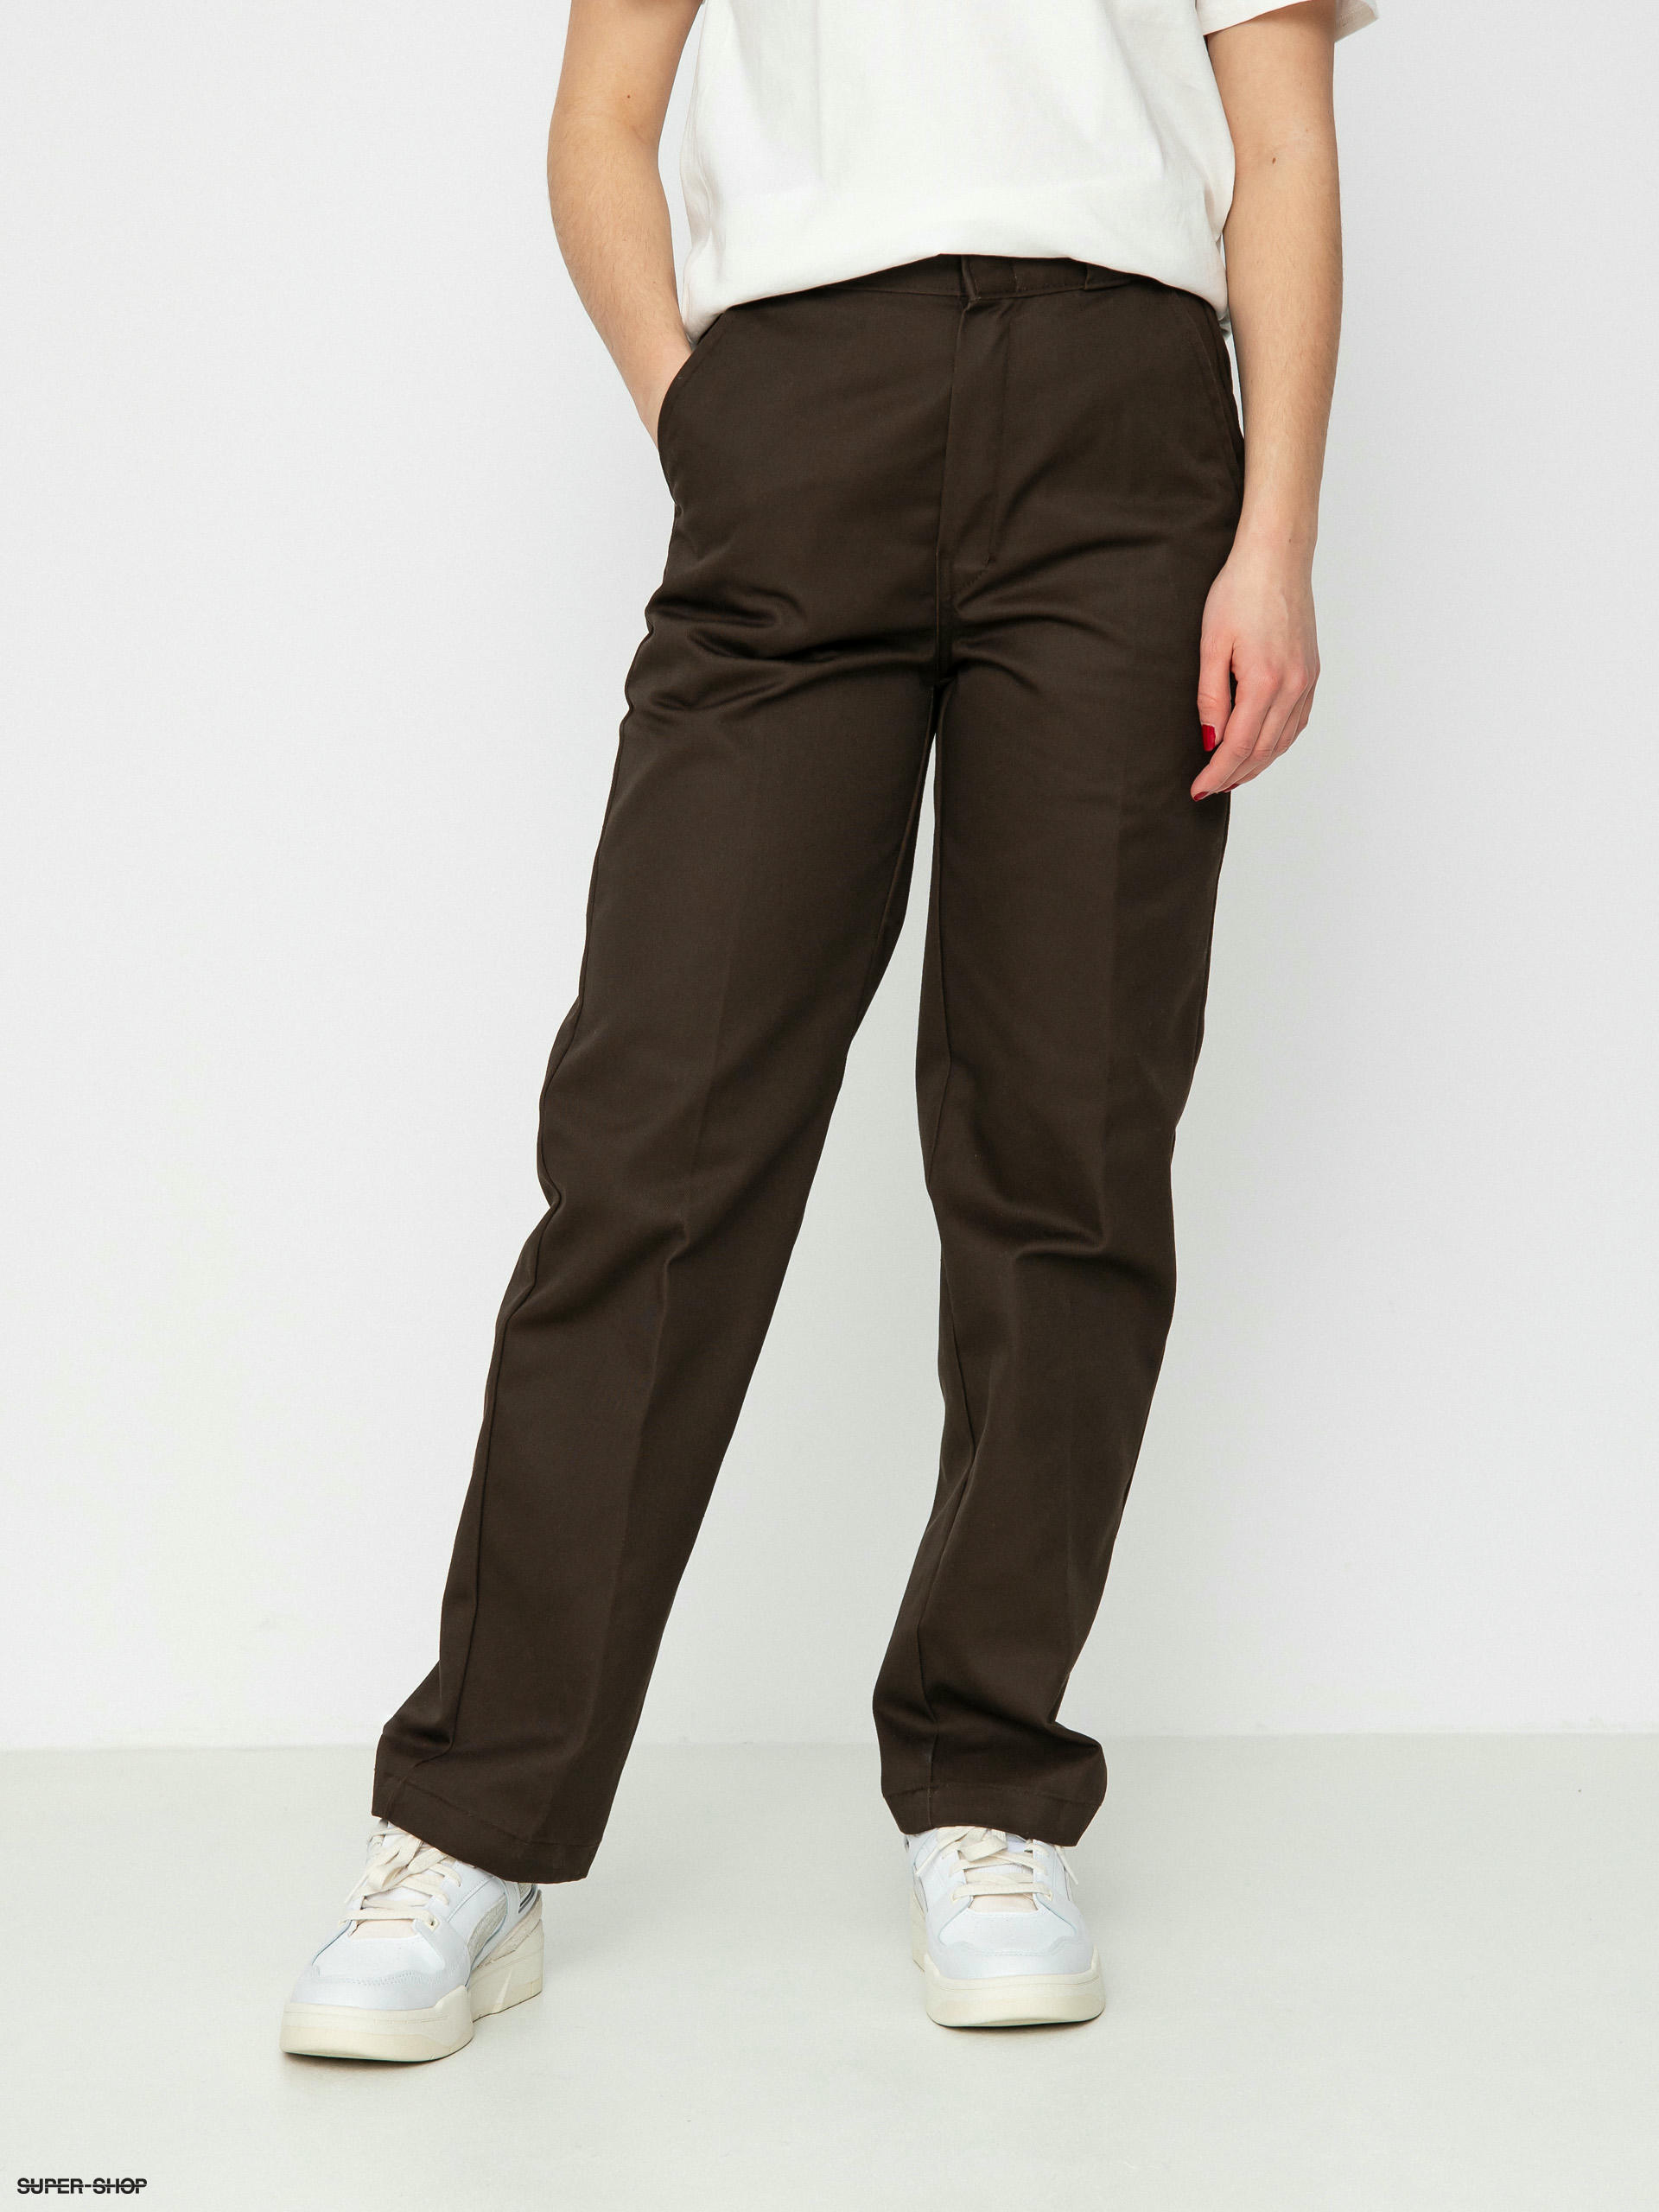 Concitor Men's Dress Pants Trousers Flat Front India | Ubuy